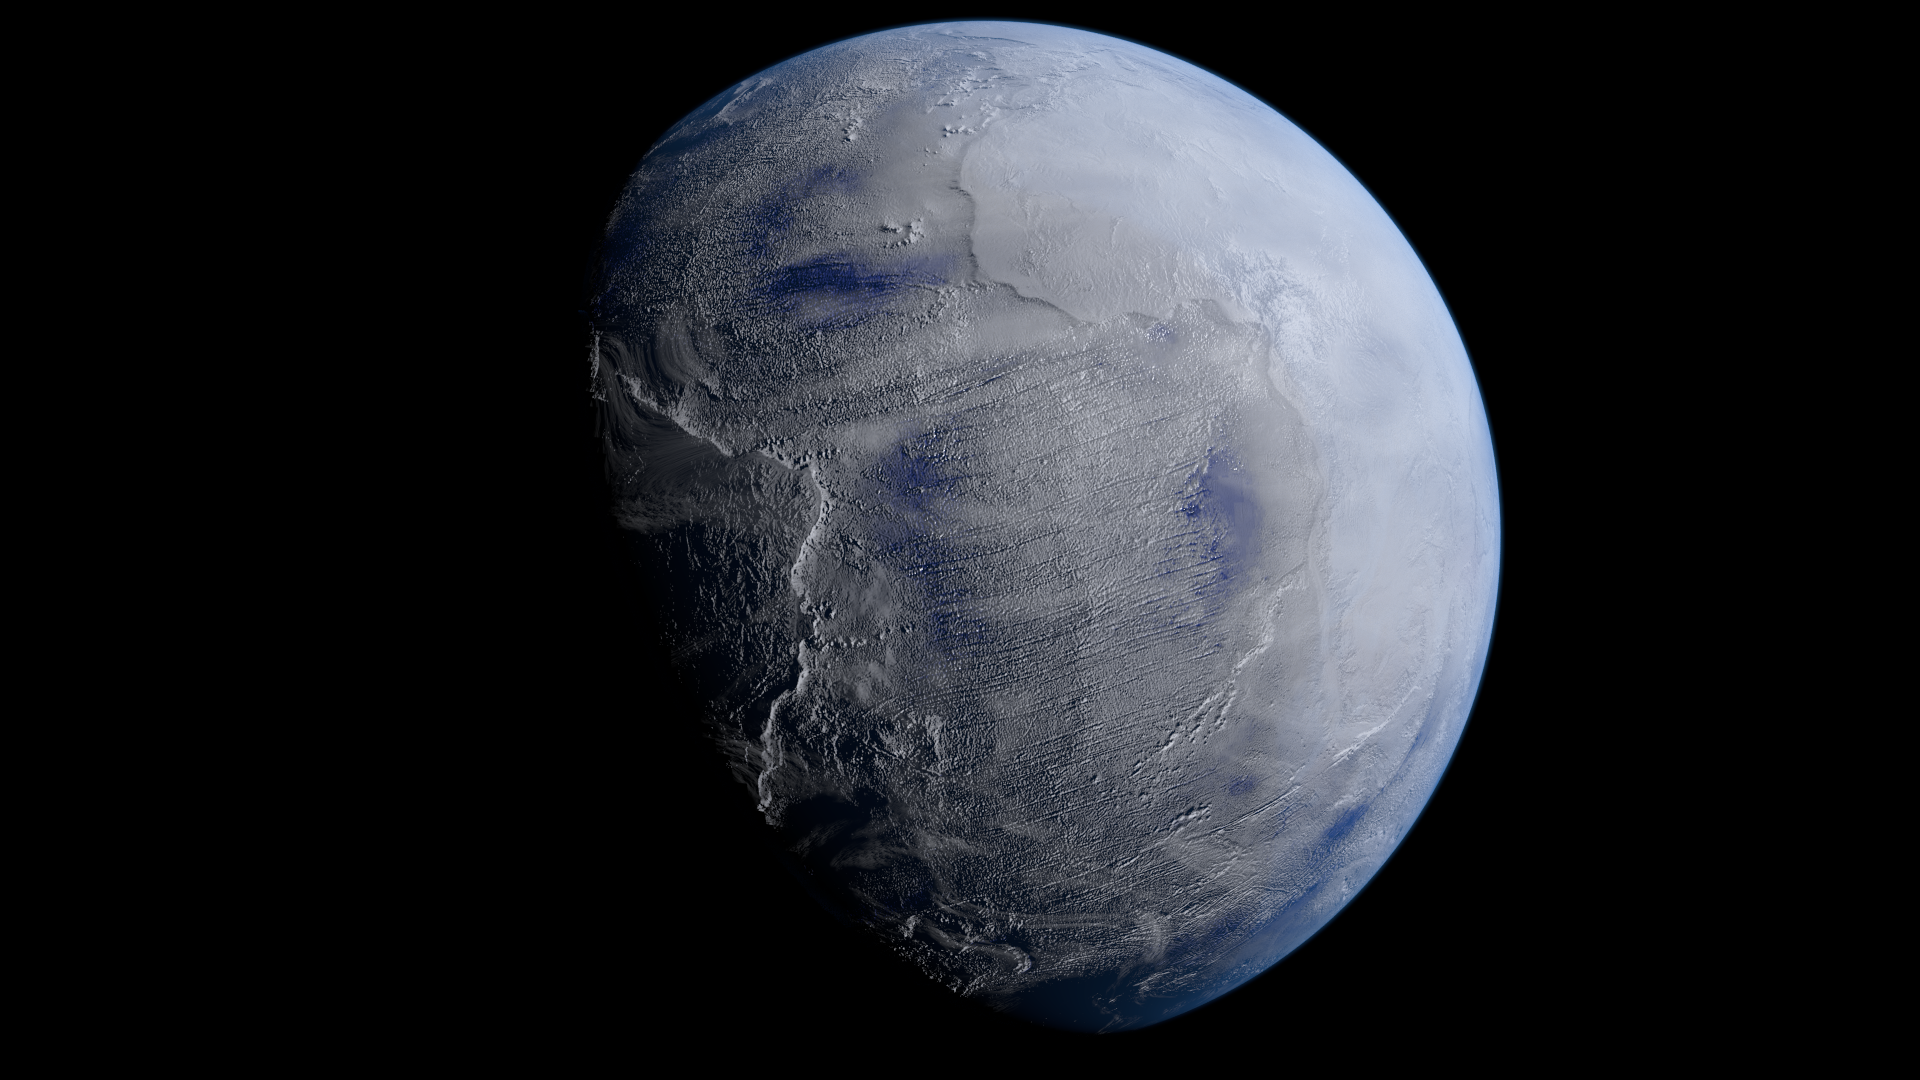 A high-resolution image of earth from space, showing a view dominated by cloud cover and oceans with a glimpse of landmass where oxygen once killed life.